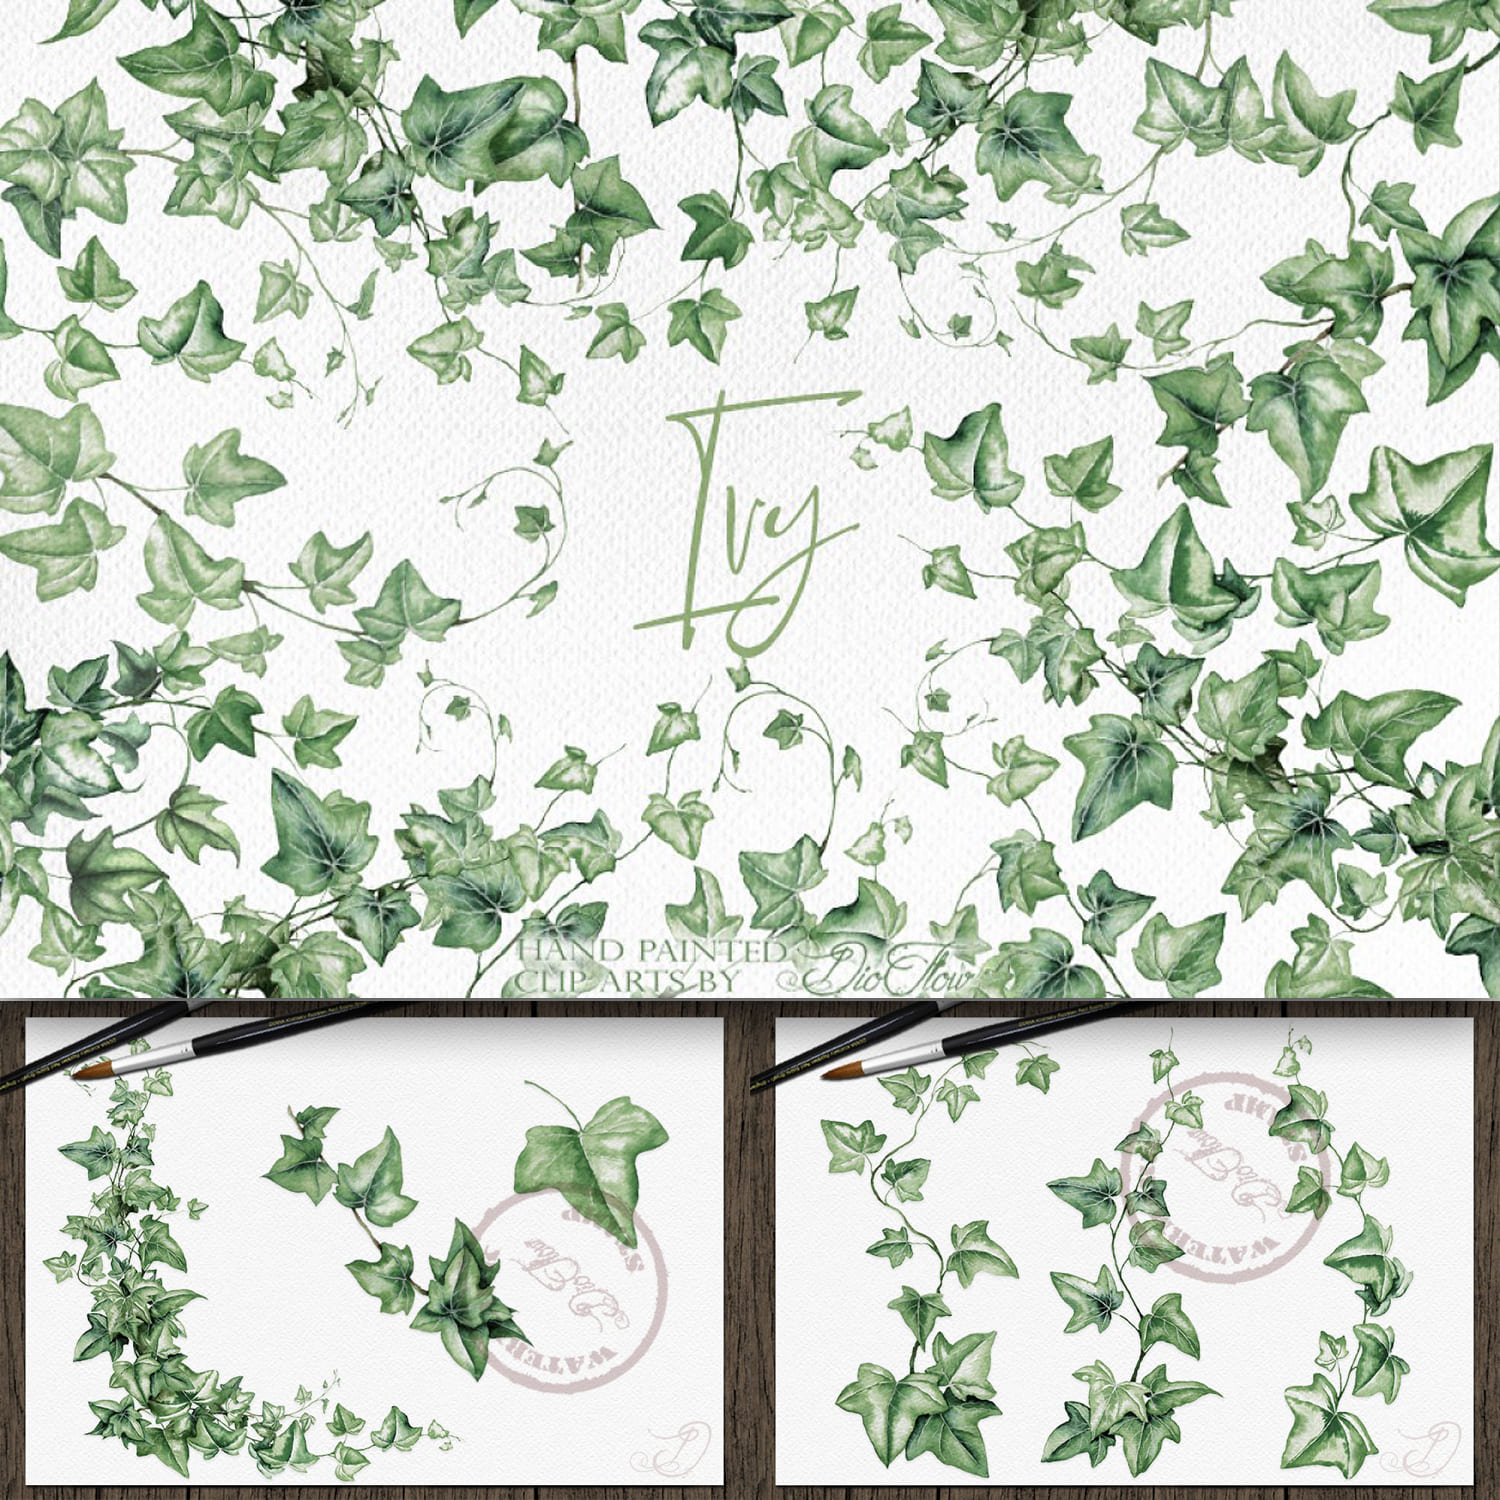 Ivy Watercolor Illustration cover.